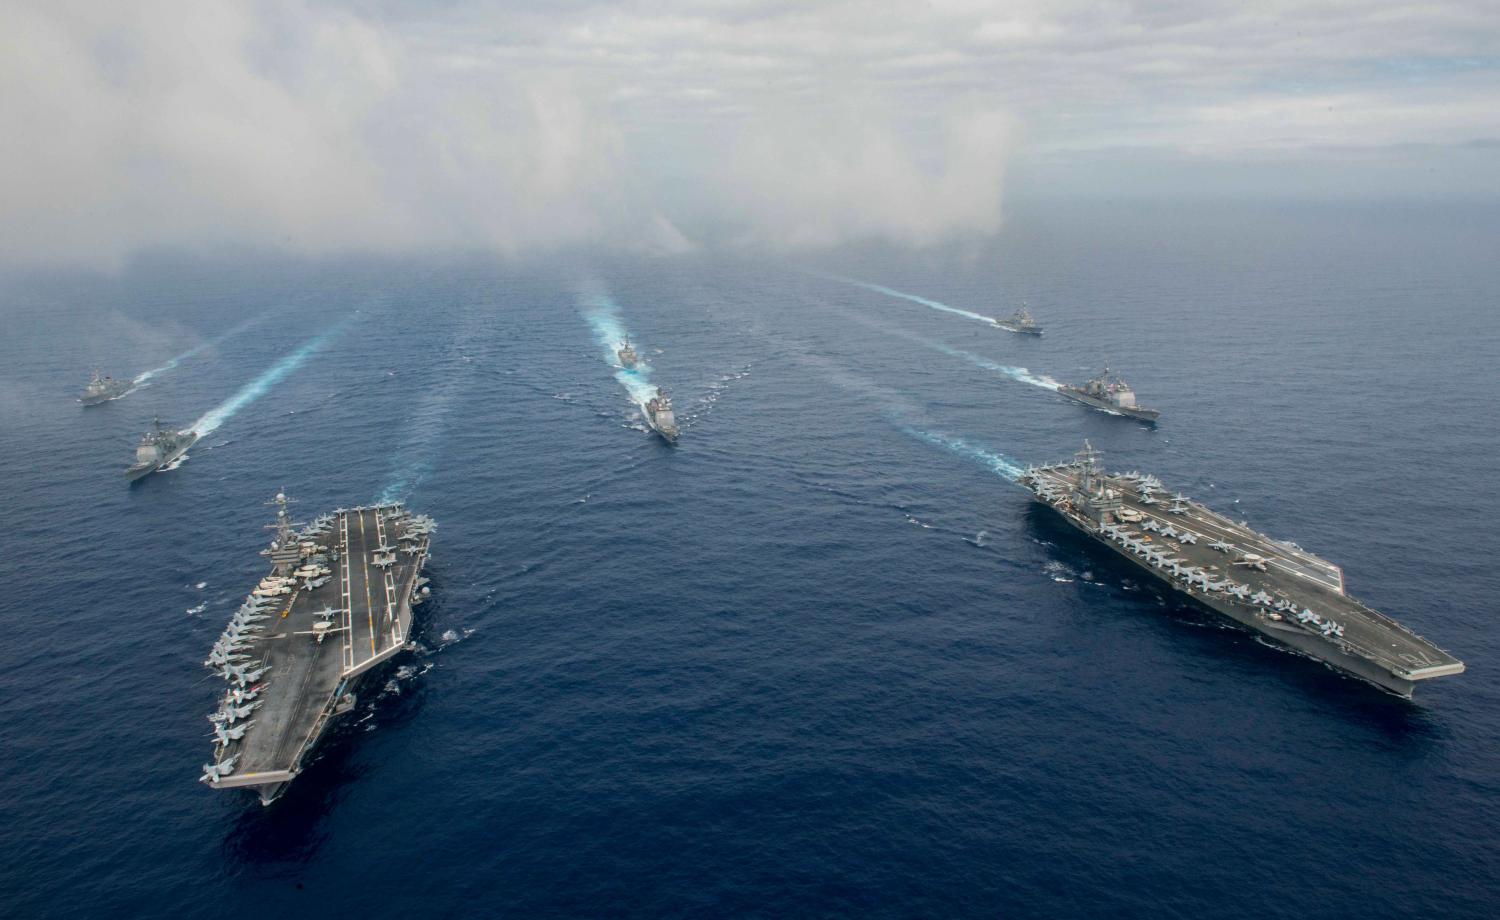 The Nimitz-class aircraft carriers USS John C. Stennis (CVN 74), and USS Ronald Reagan (CVN 76) (R) conduct dual aircraft carrier strike group operations in the U.S. 7th Fleet area of operations in support of security and stability in the Indo-Asia-Pacific in the Philippine Sea on June 18, 2016. Courtesy Jake Greenberg/U.S. Navy/Handout via REUTERS.